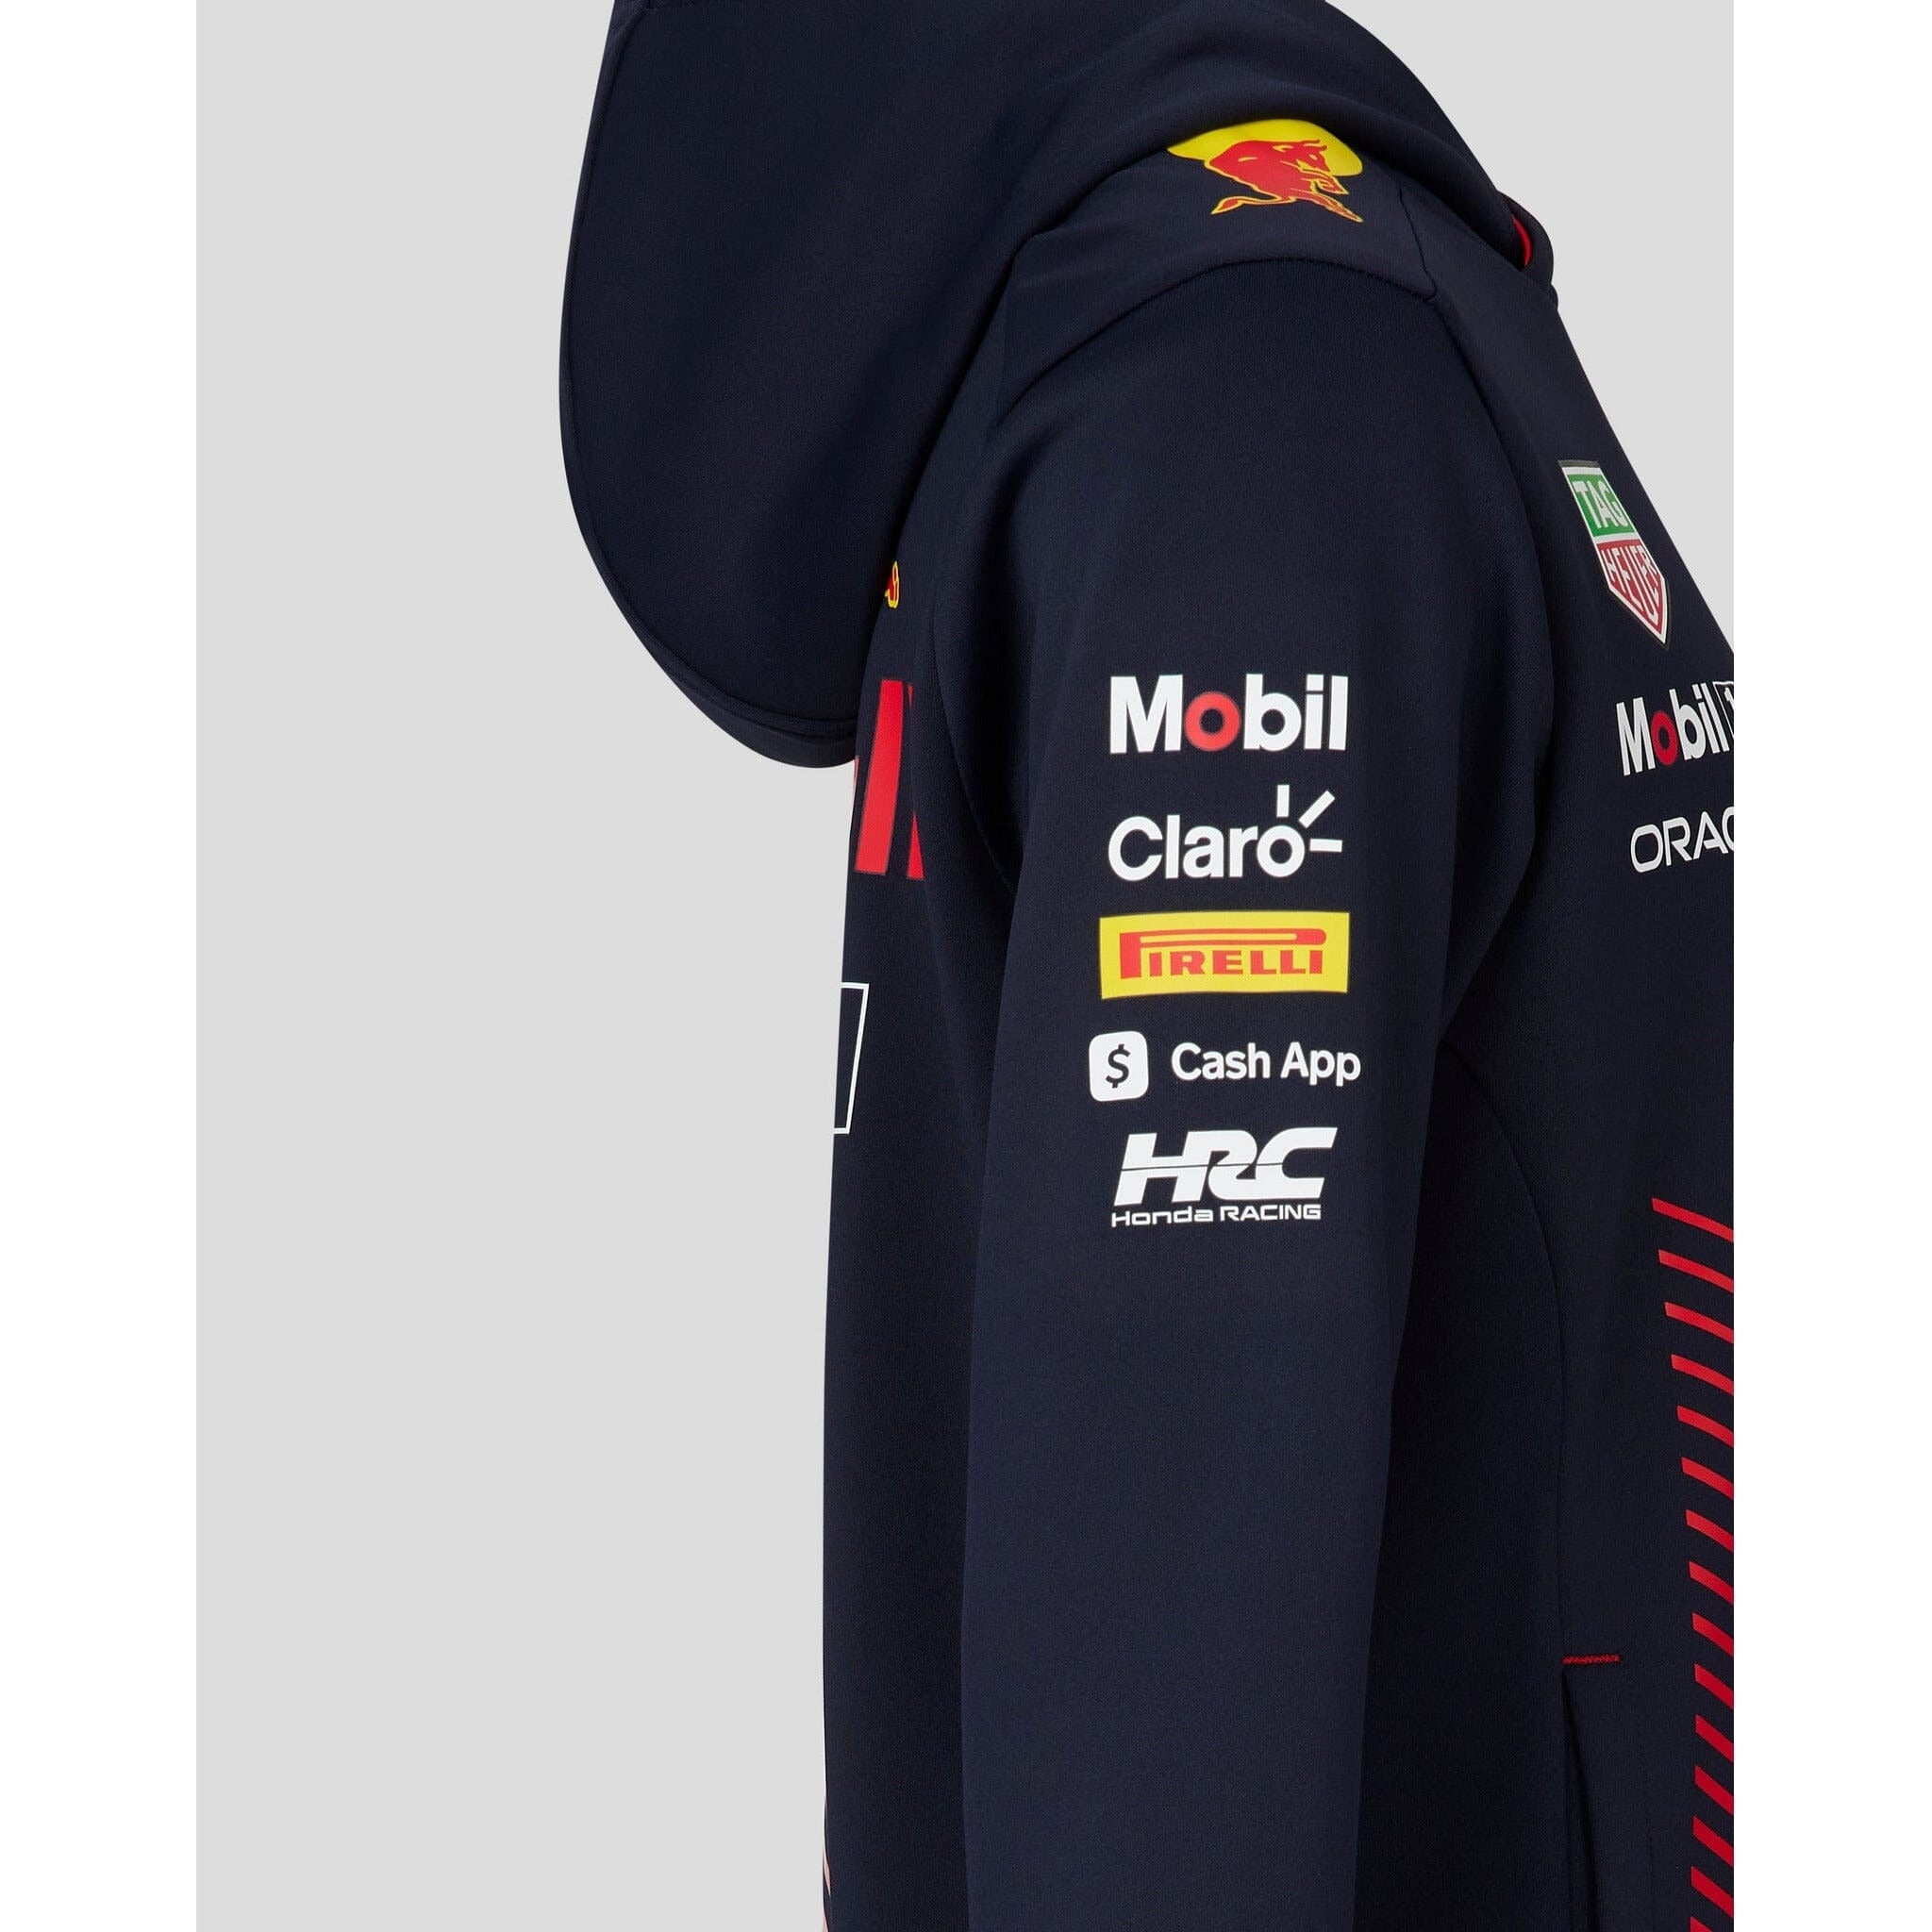 Oracle Red Bull Racing Teamline T-shirt 2023 - The Racing Store